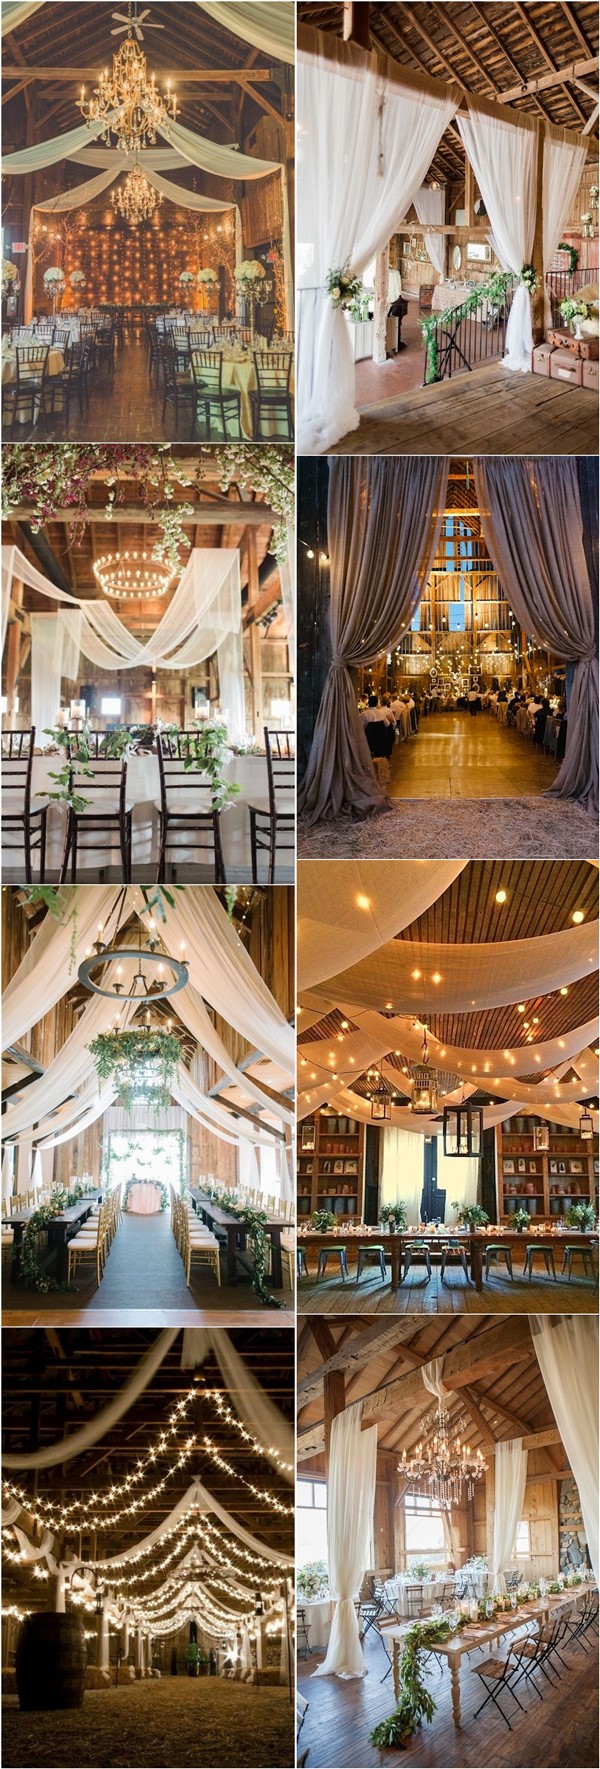 rustic country barn wedding reception ideas with draping